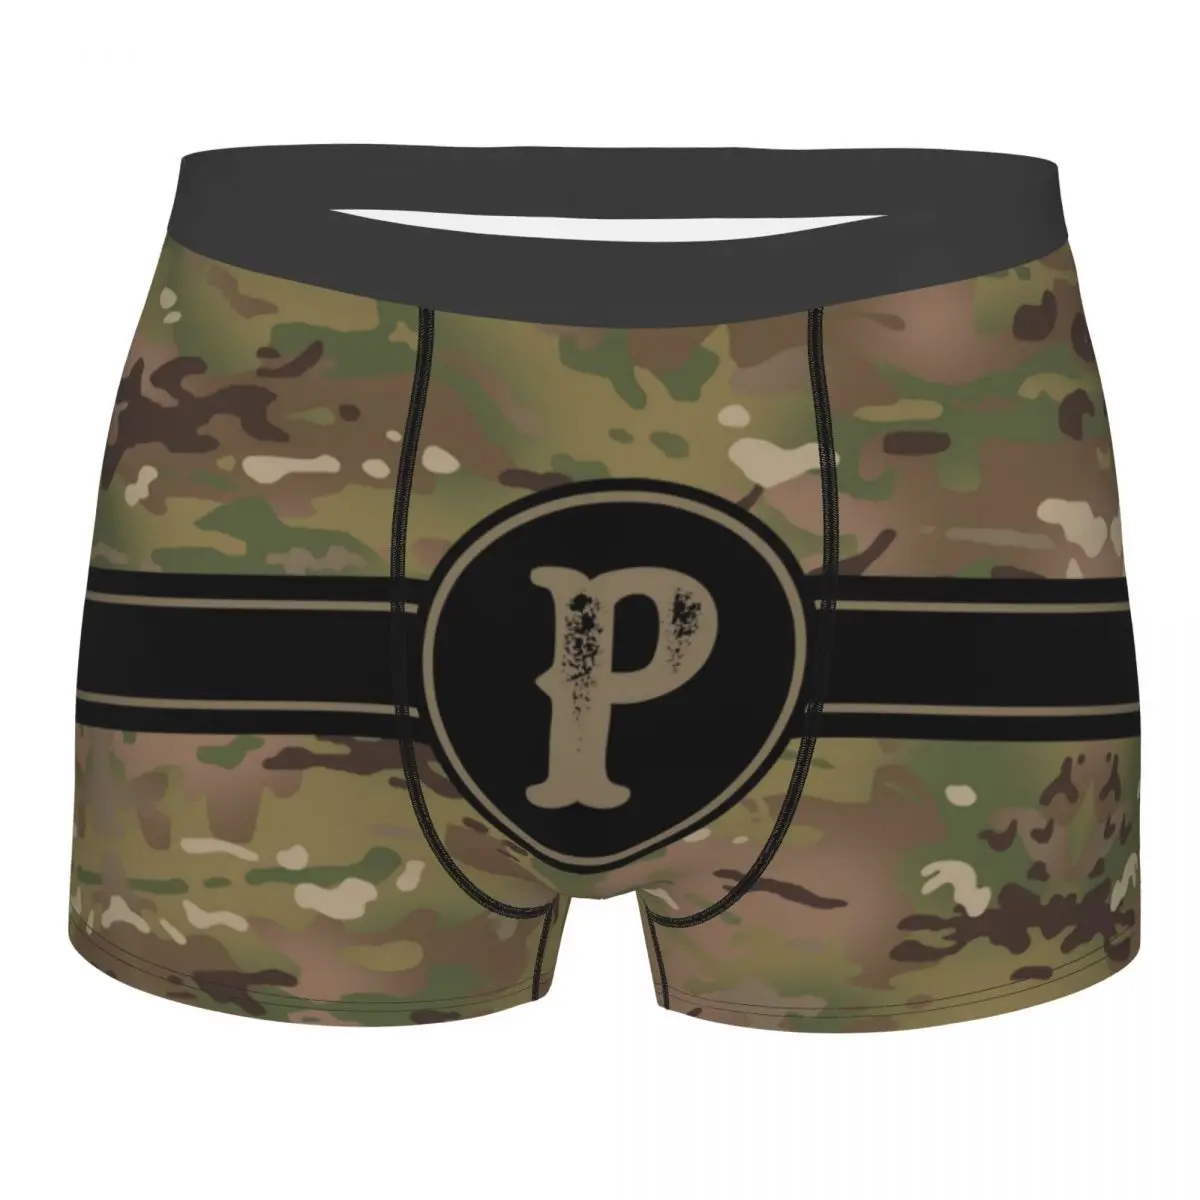 

Men's Army Camouflage Monogram Letter P Underwear Military Camo Funny Boxer Briefs Shorts Panties Male Soft Underpants